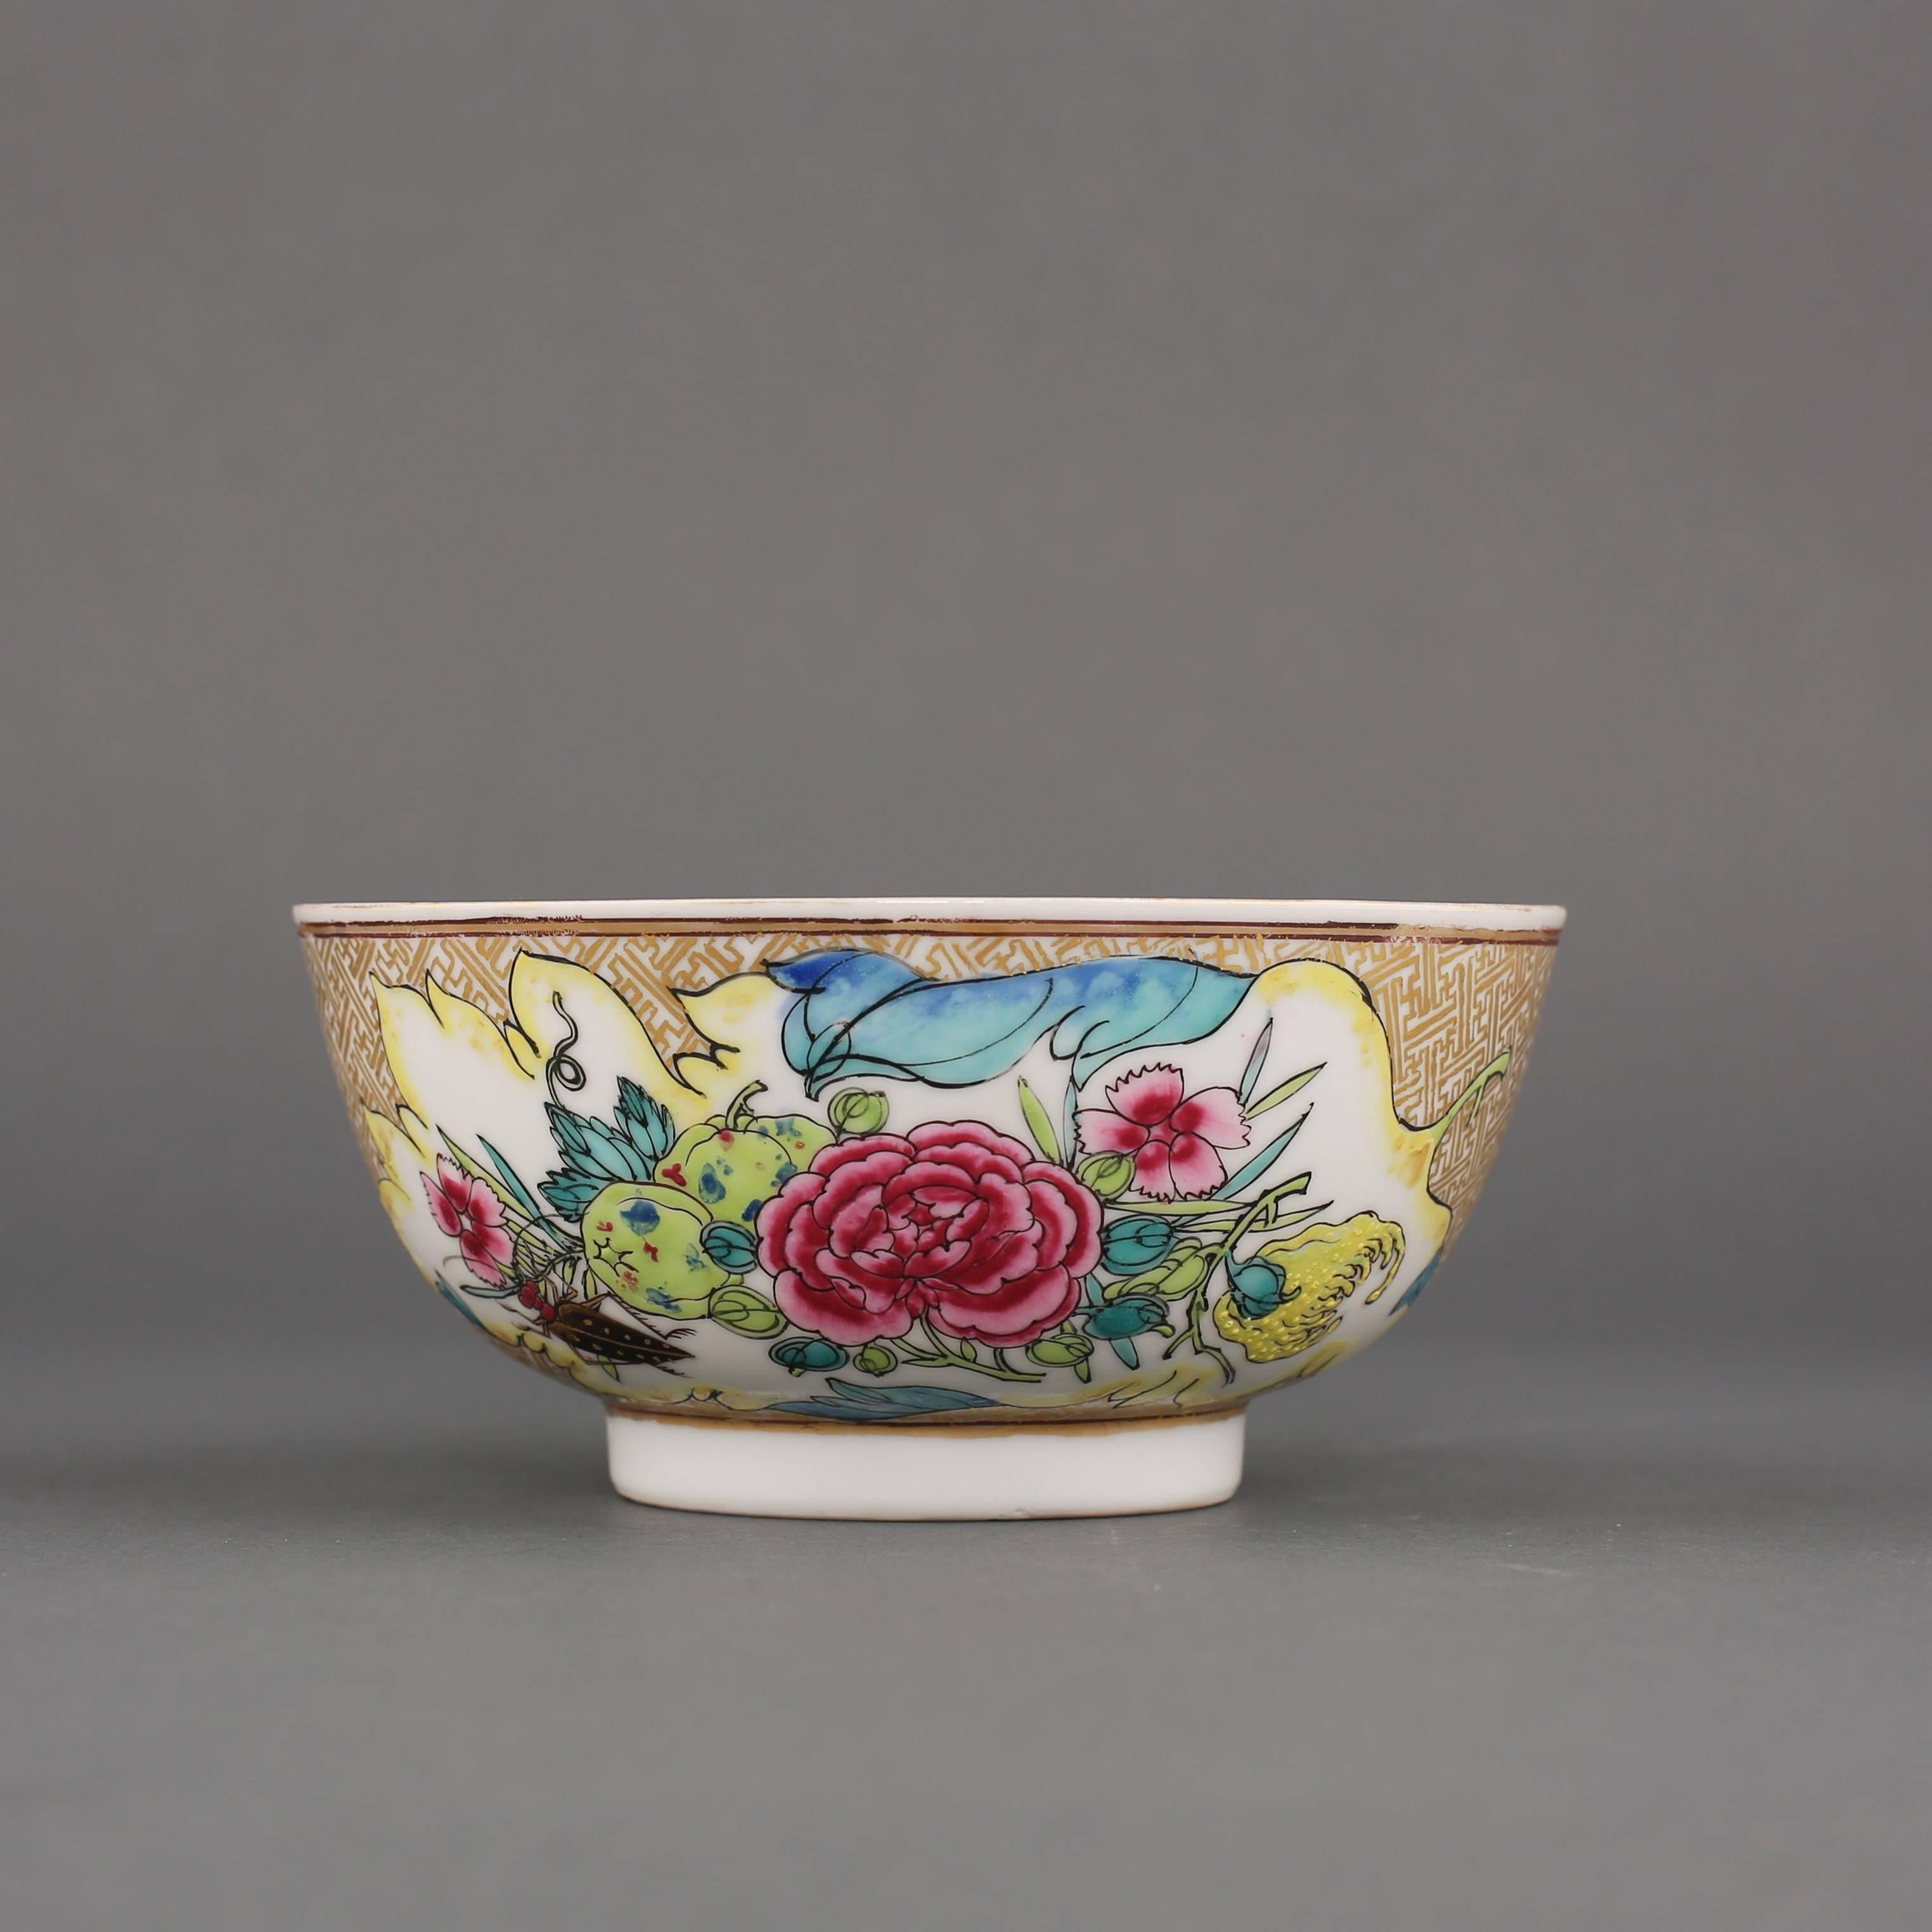 Chinese porcelain semi egg shell famille rose small bowl painted with a cicada amongst two leaf shaped panels of peony, peach, finger citron and other flowers and leaves all on a gilt key fret ground, the interior painted with a single stylized